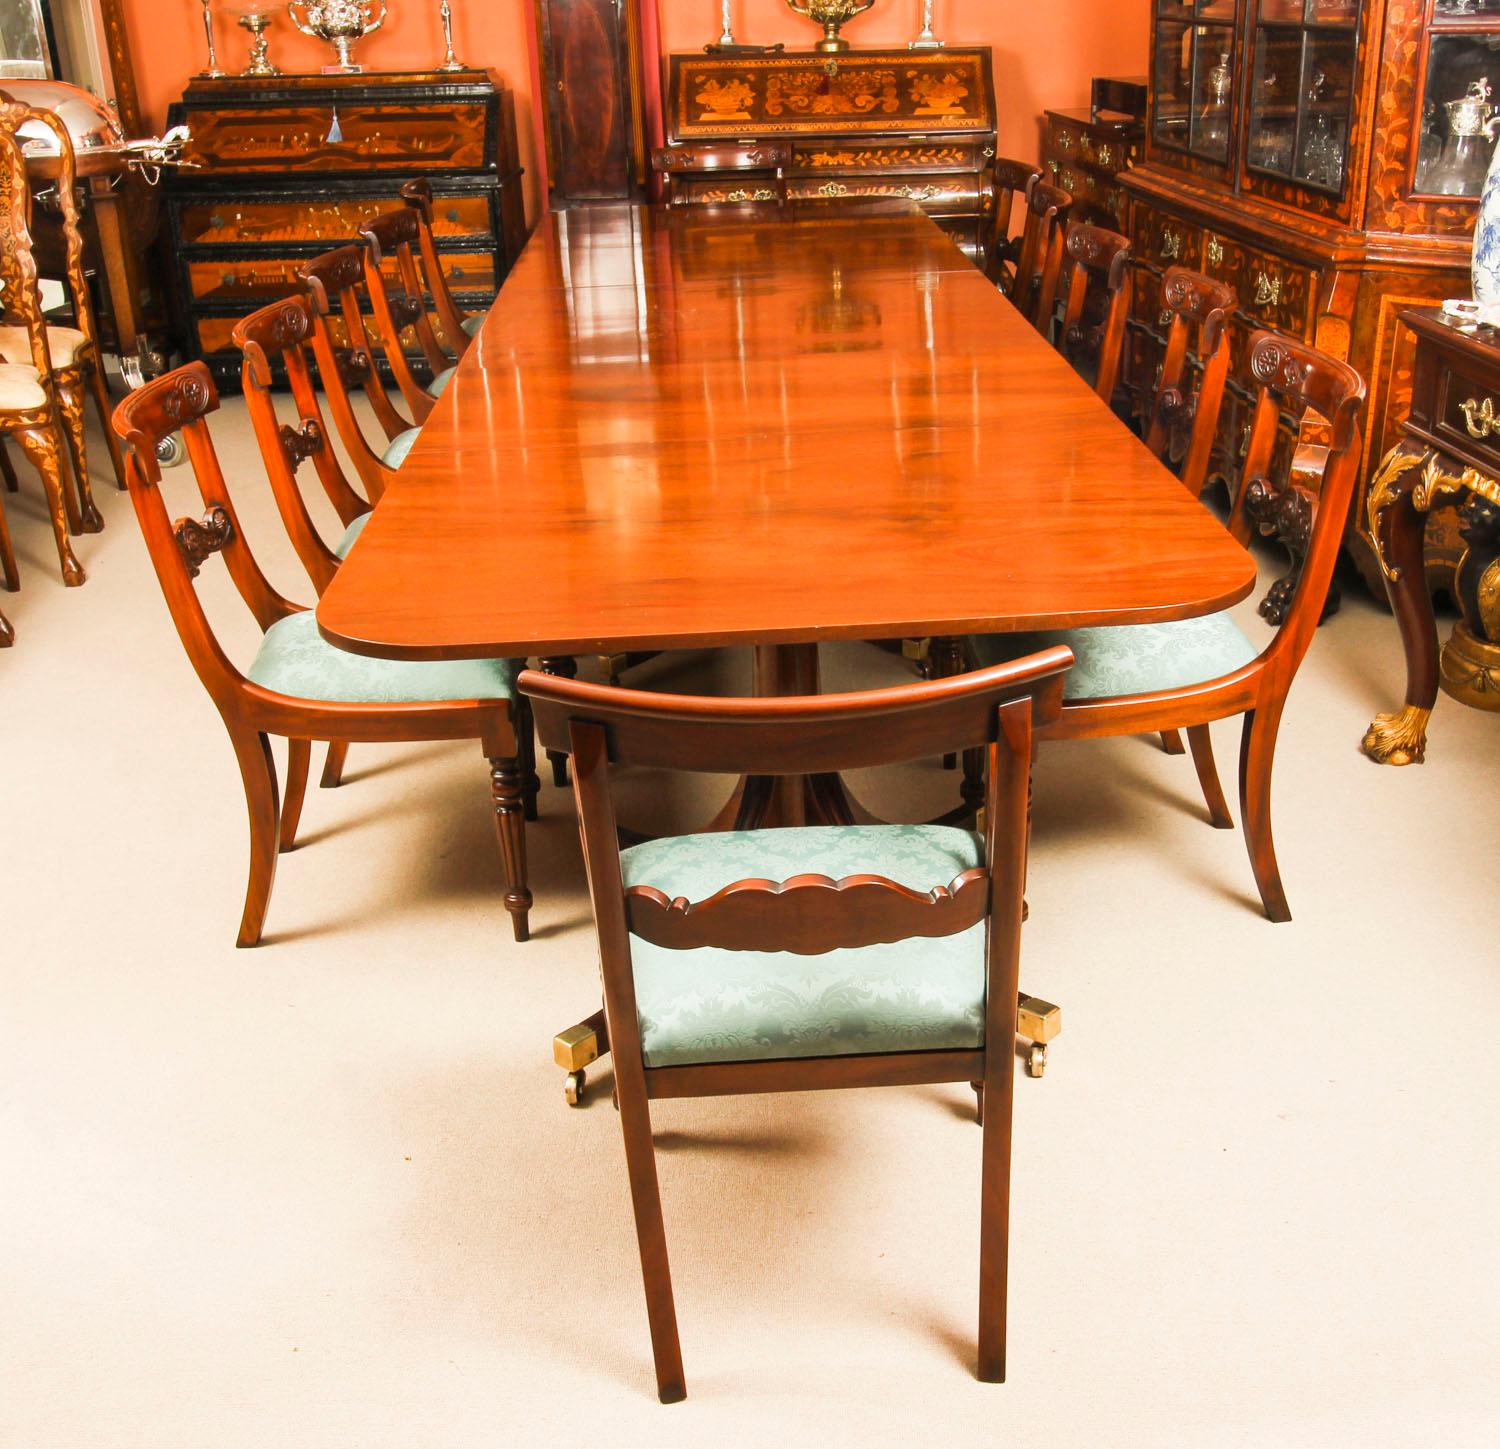 This is wonderful vintage dining set comprising a Regency style dining table by William Tillman and a set of twelve bar back dining chairs, circa 1980 in date.

The table is made of stunning solid flame mahogany and is raised on three 